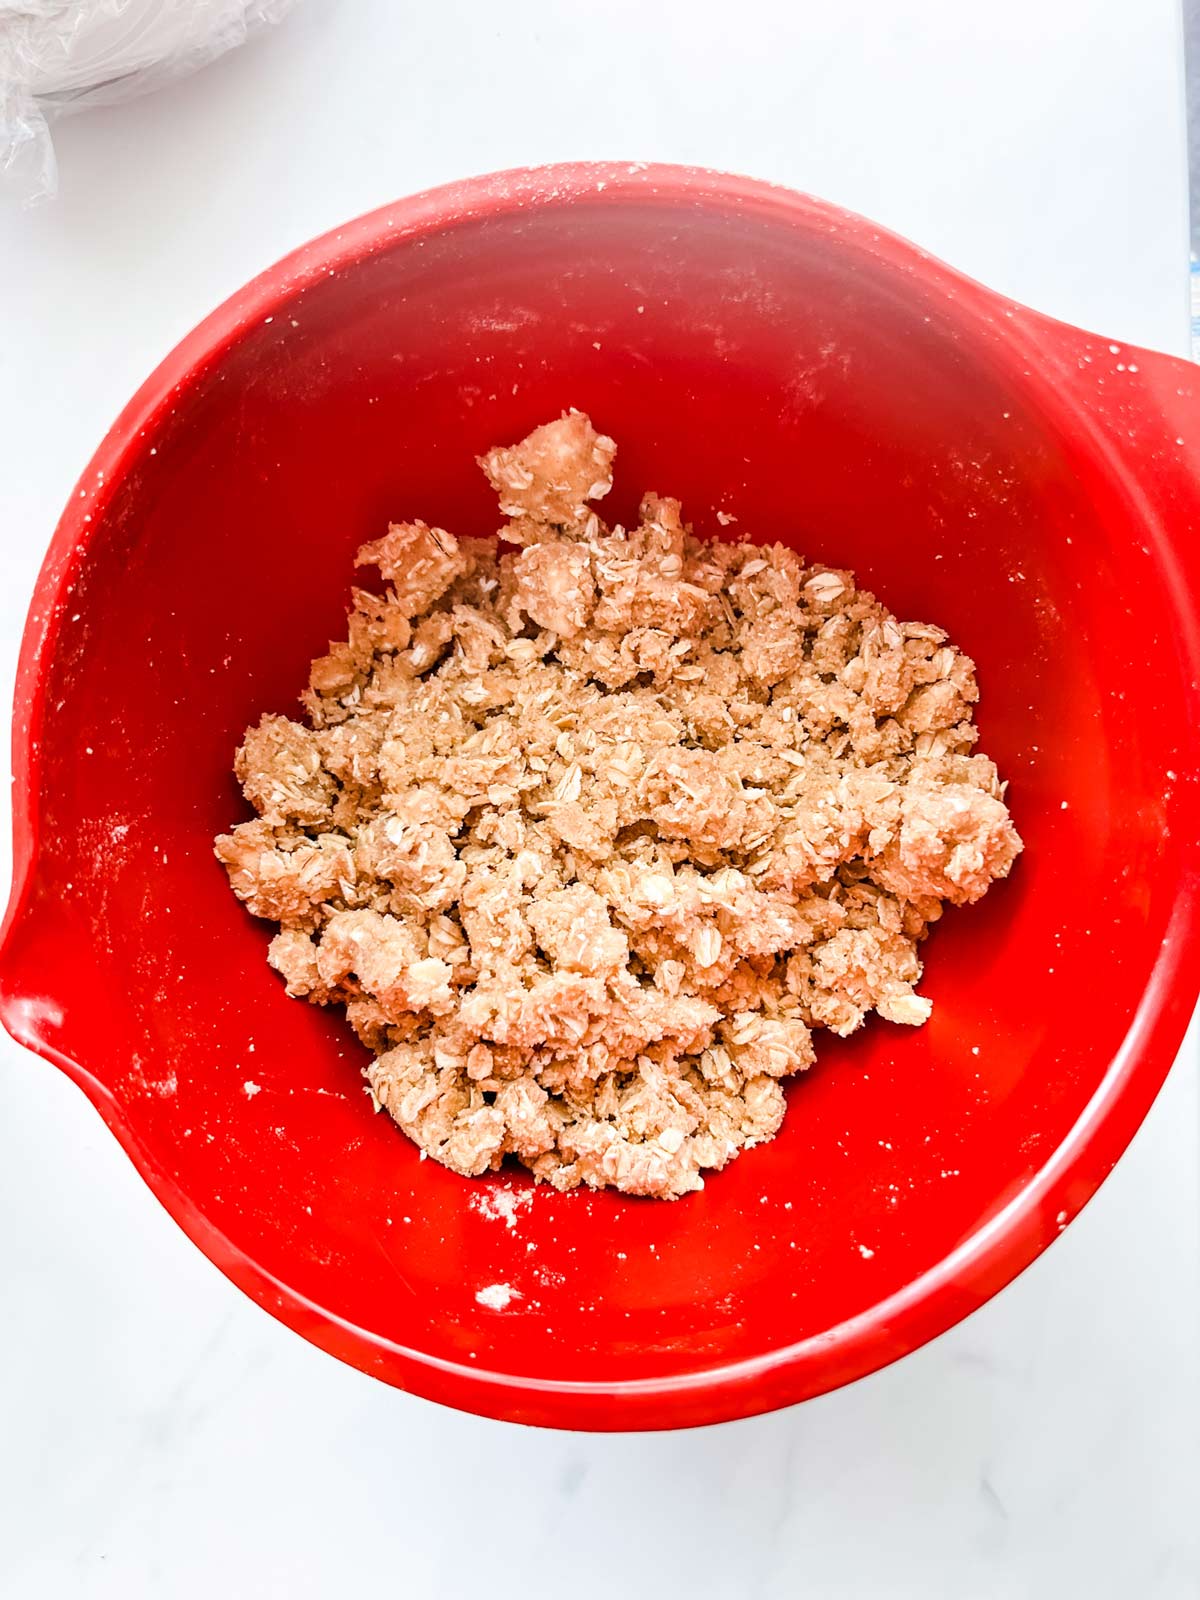 Photo of a crumble topping in a red bowl.